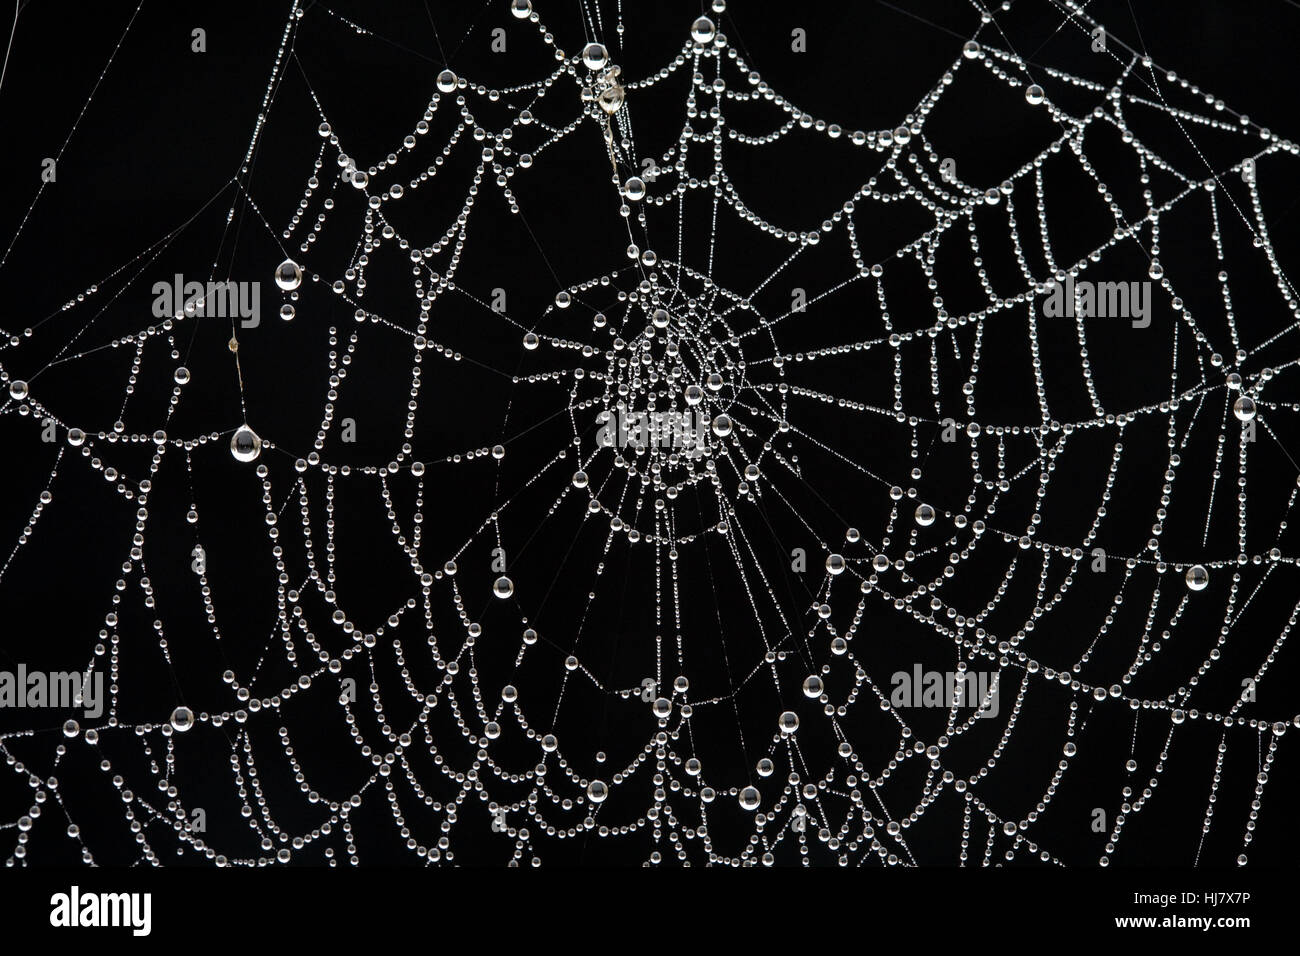 The web of a cross orbweaver spider, Araneus diadematus, covered with dew on a frosty october morning. Stock Photo